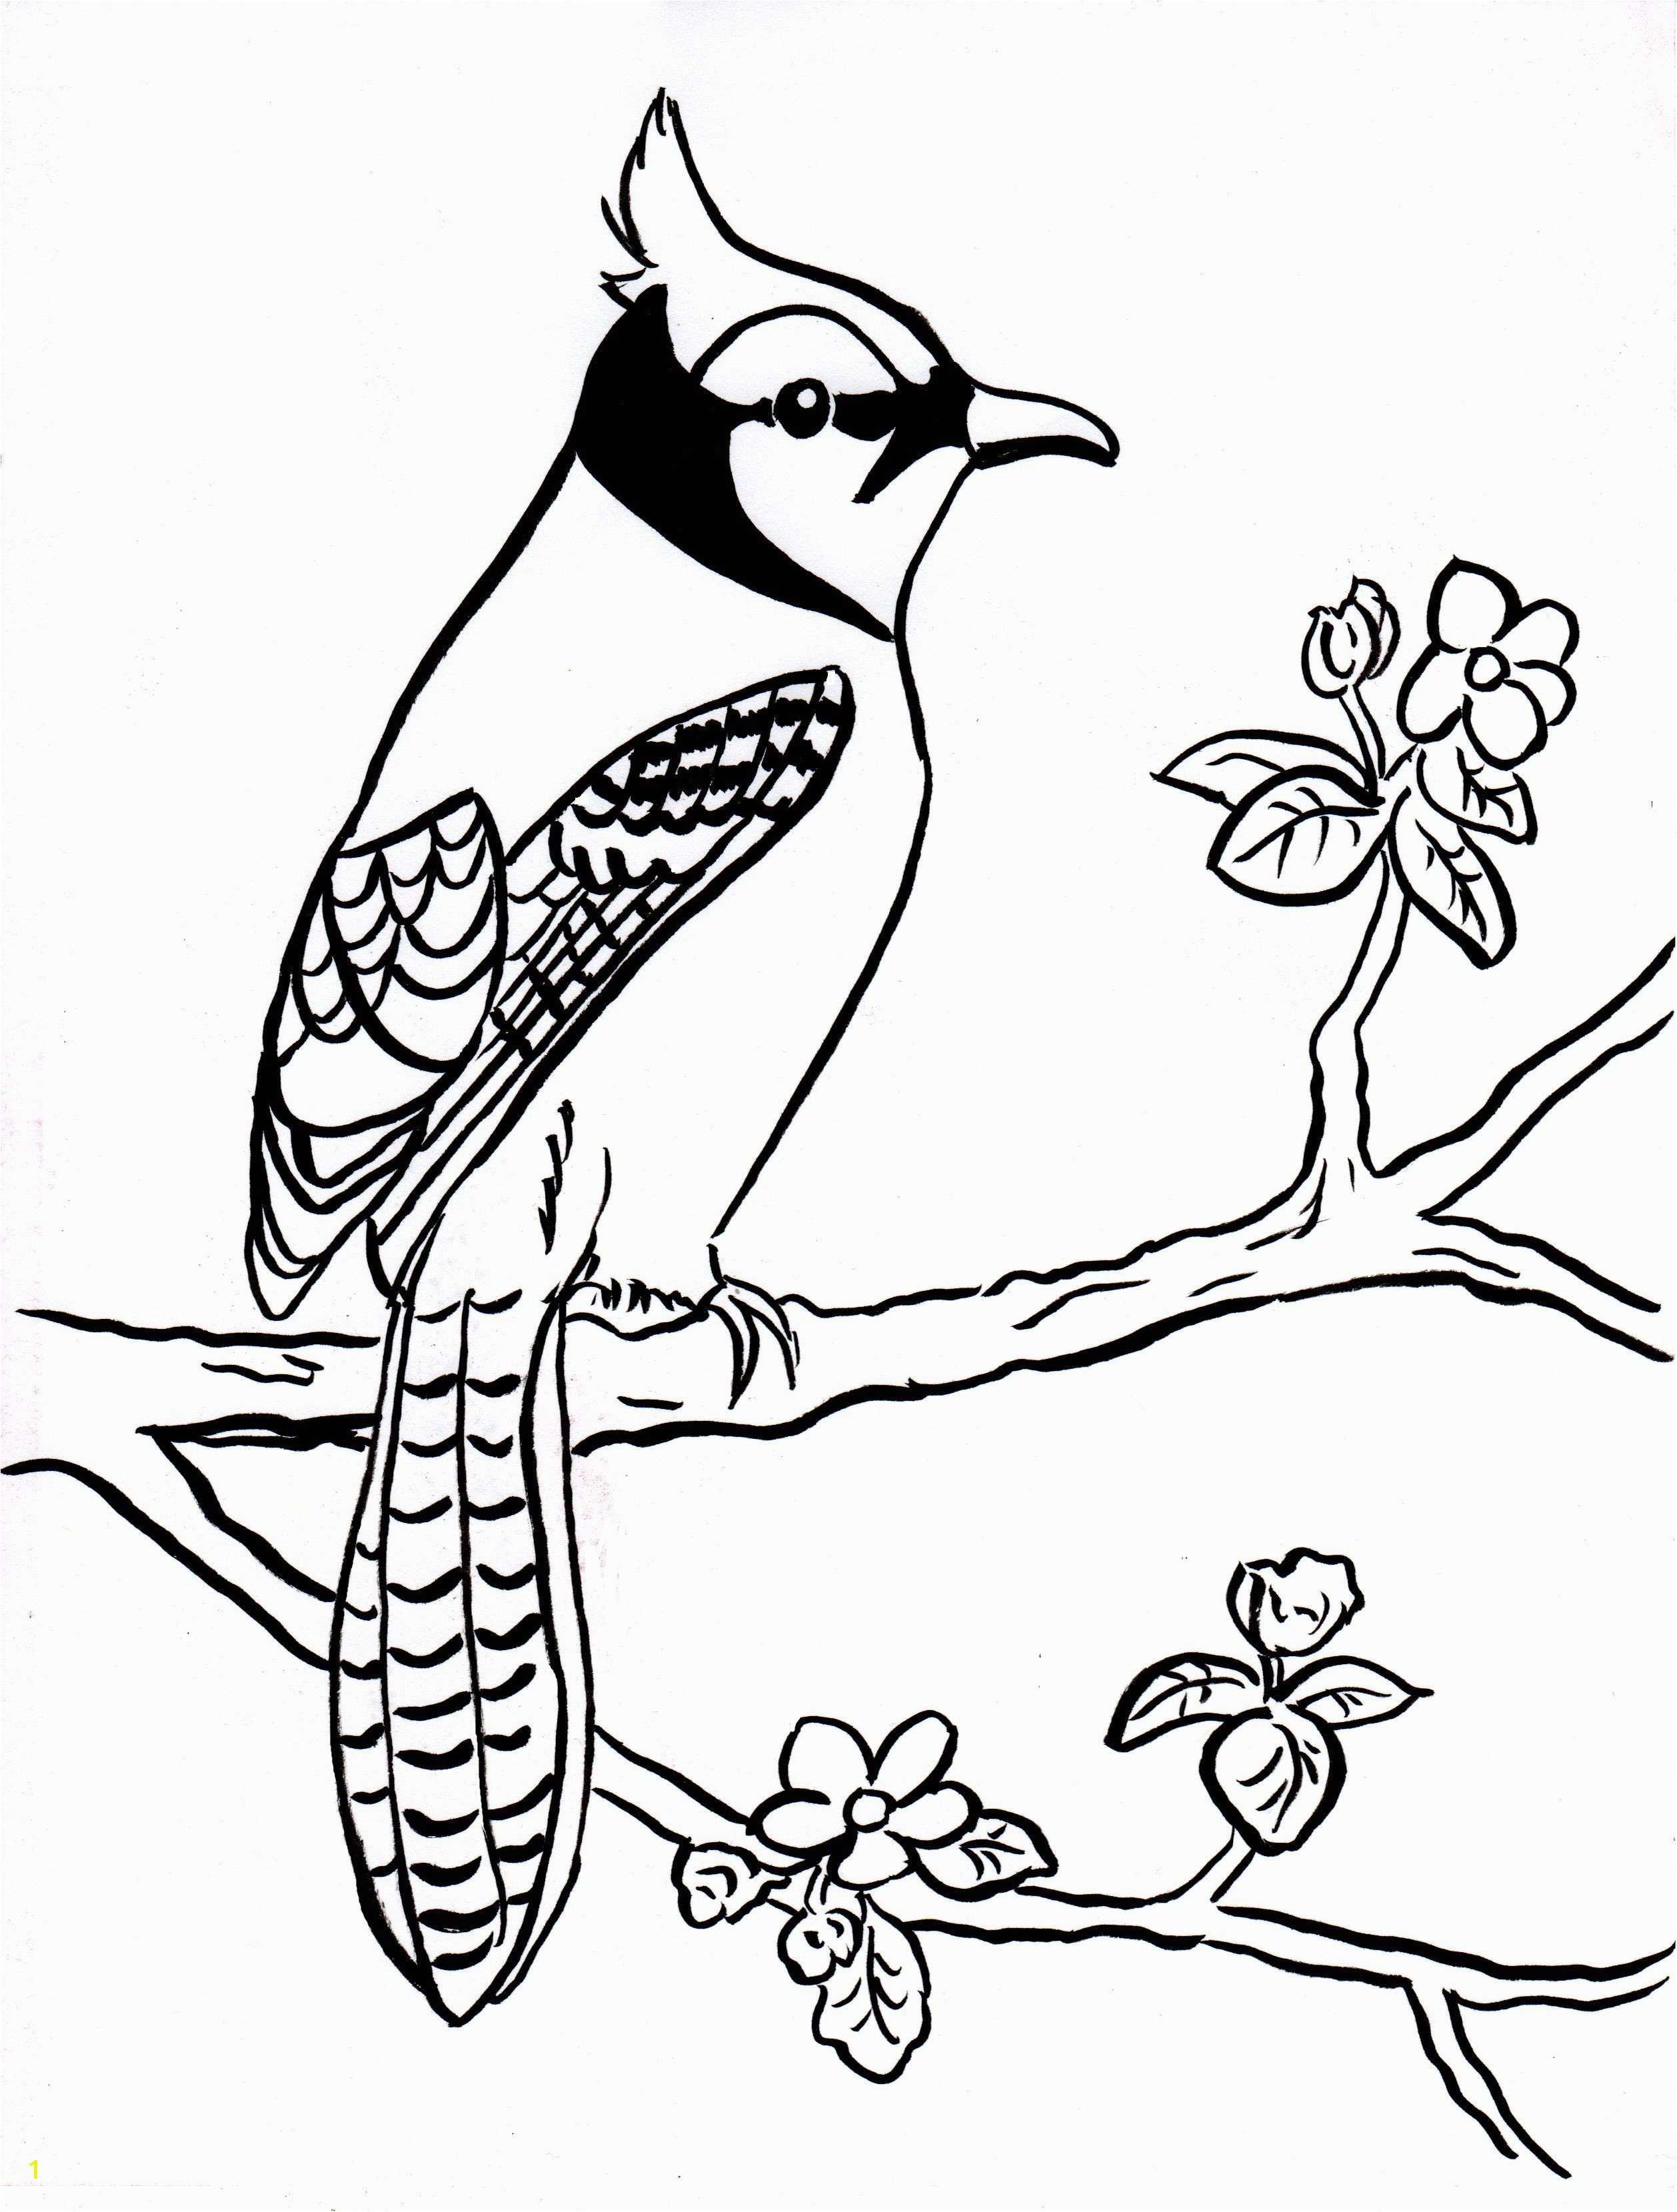 Toronto Blue Jays Logo Coloring Pages Coloring Pages